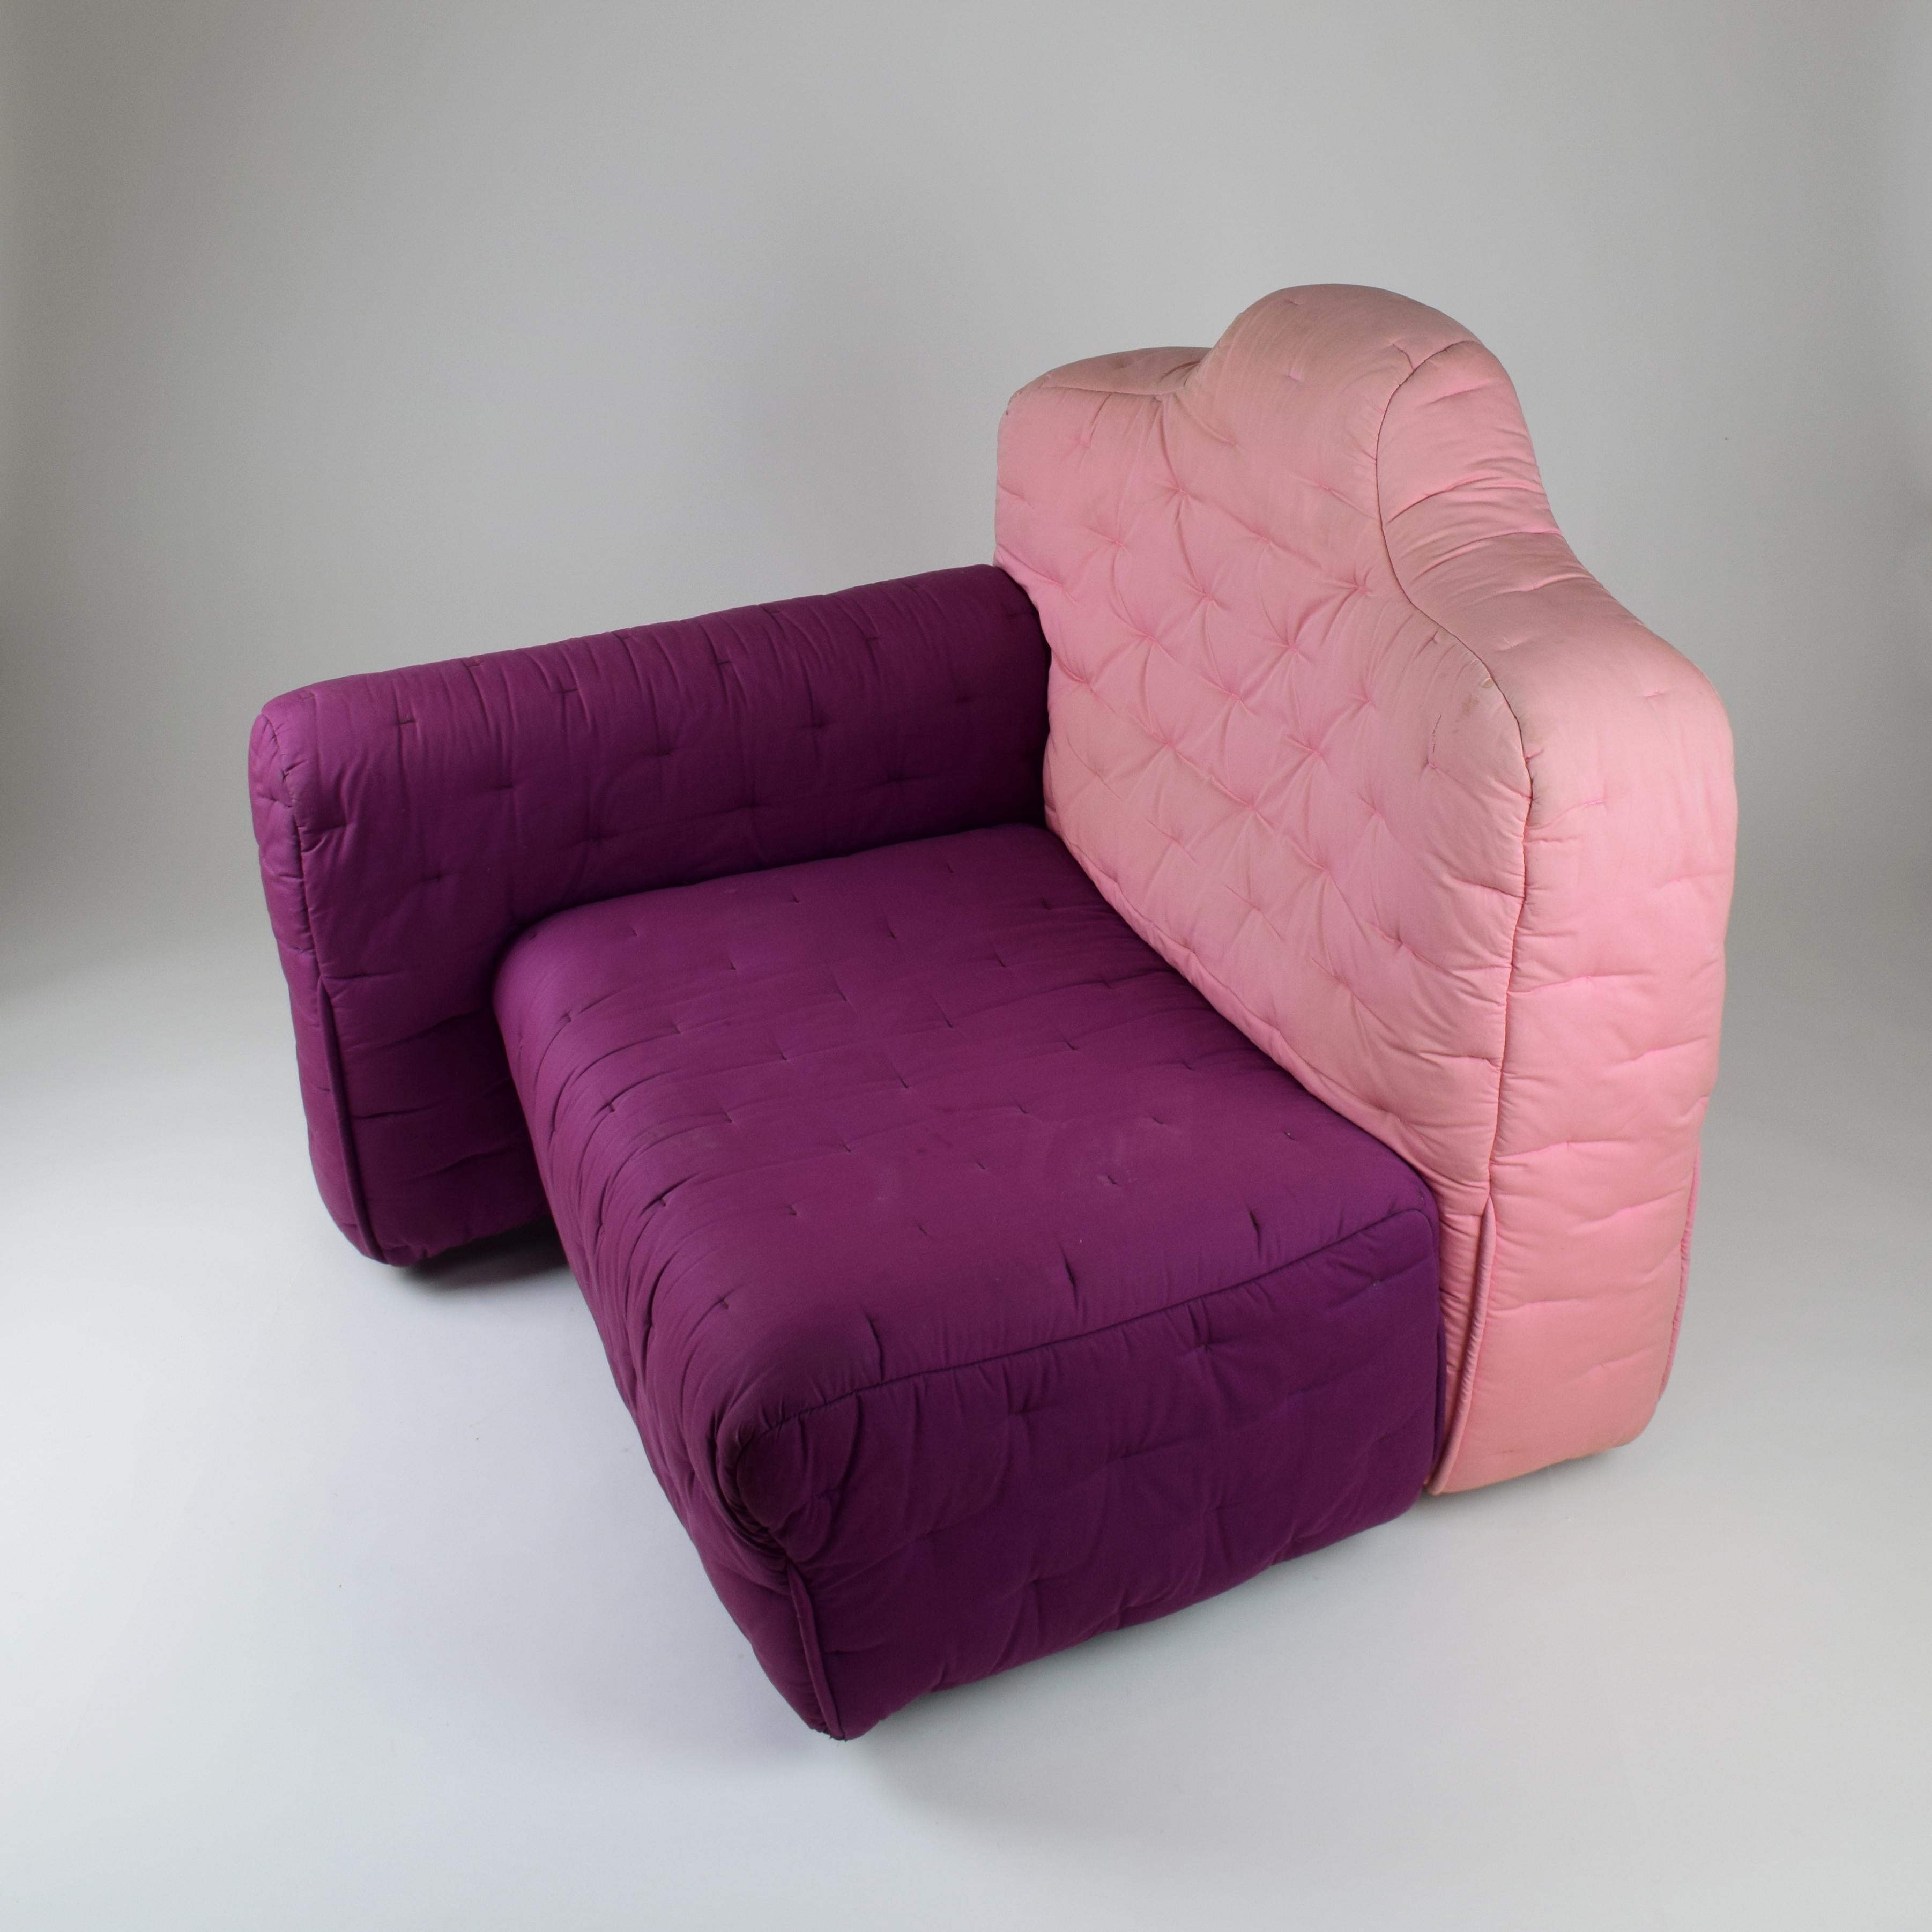 Gaetano Pesce, 'Cannaregio' Armchair, Cassina Italy 1987, Large Pink and Purple For Sale 11